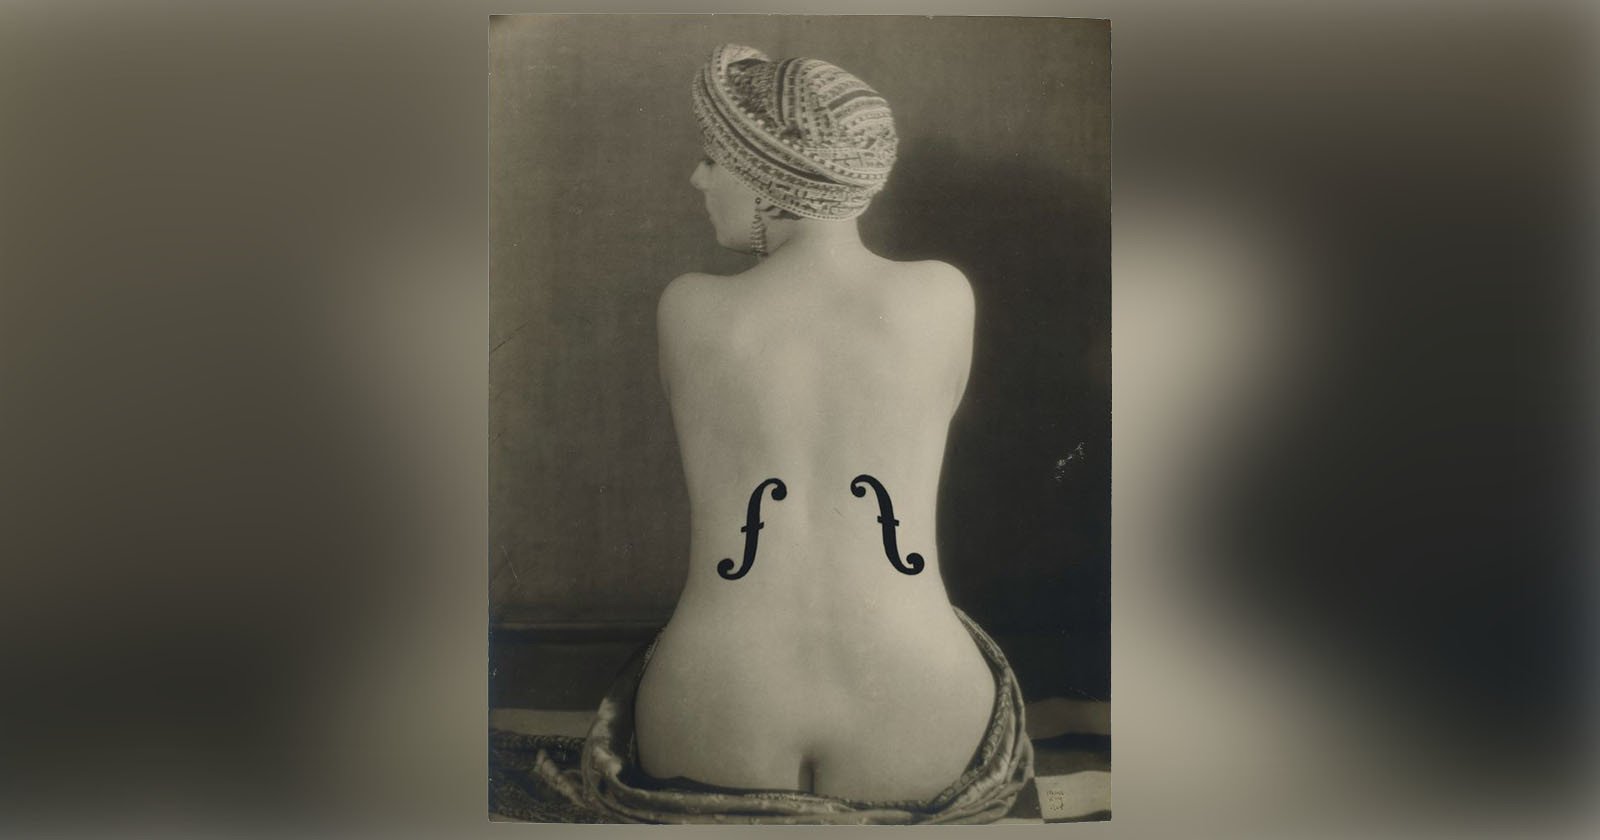 Man Ray Photo of Nude Woman May Soon Be Most Expensive Photo Ever